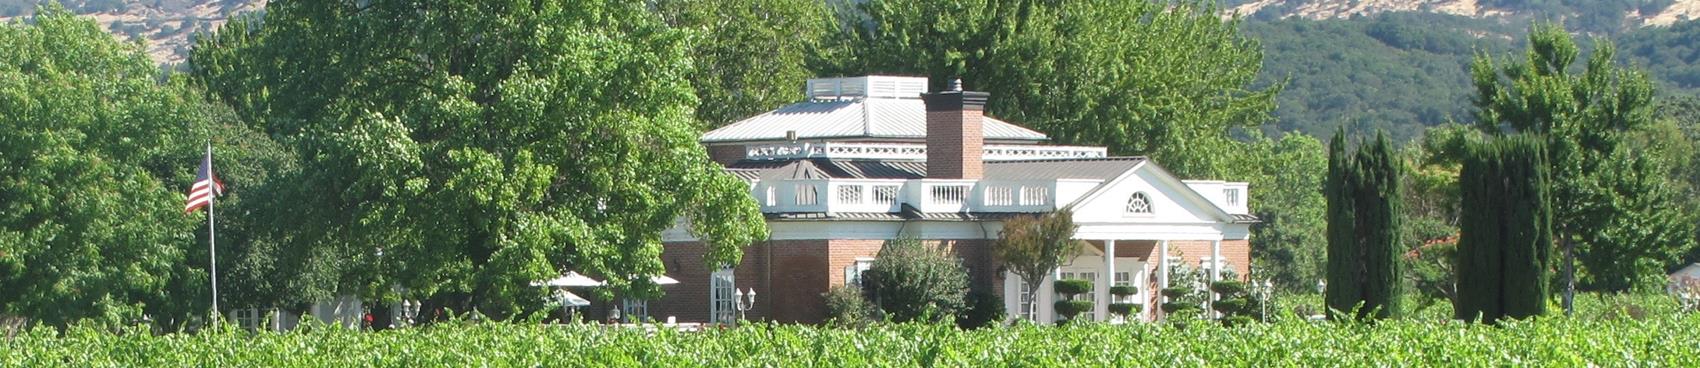 Purchase tickets to Monticello Vineyards on CellarPass